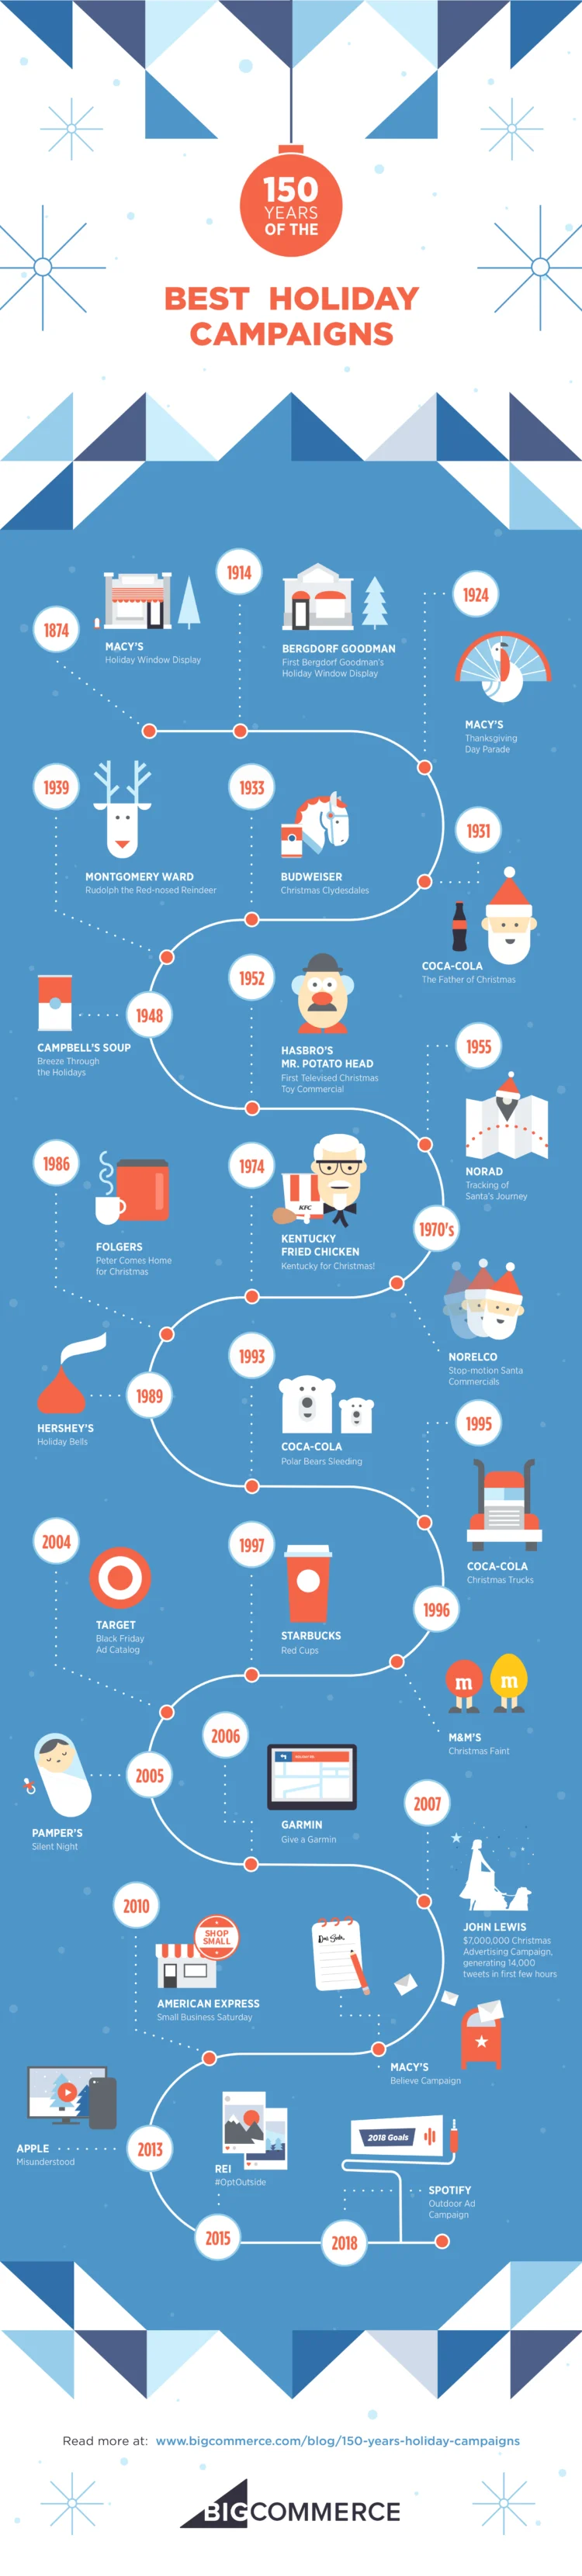 https://bcwpmktg.wpengine.com/wp-content/uploads/2017/11/150-Years-Best-Holiday-Campaigns-Infographic-750x3321.png